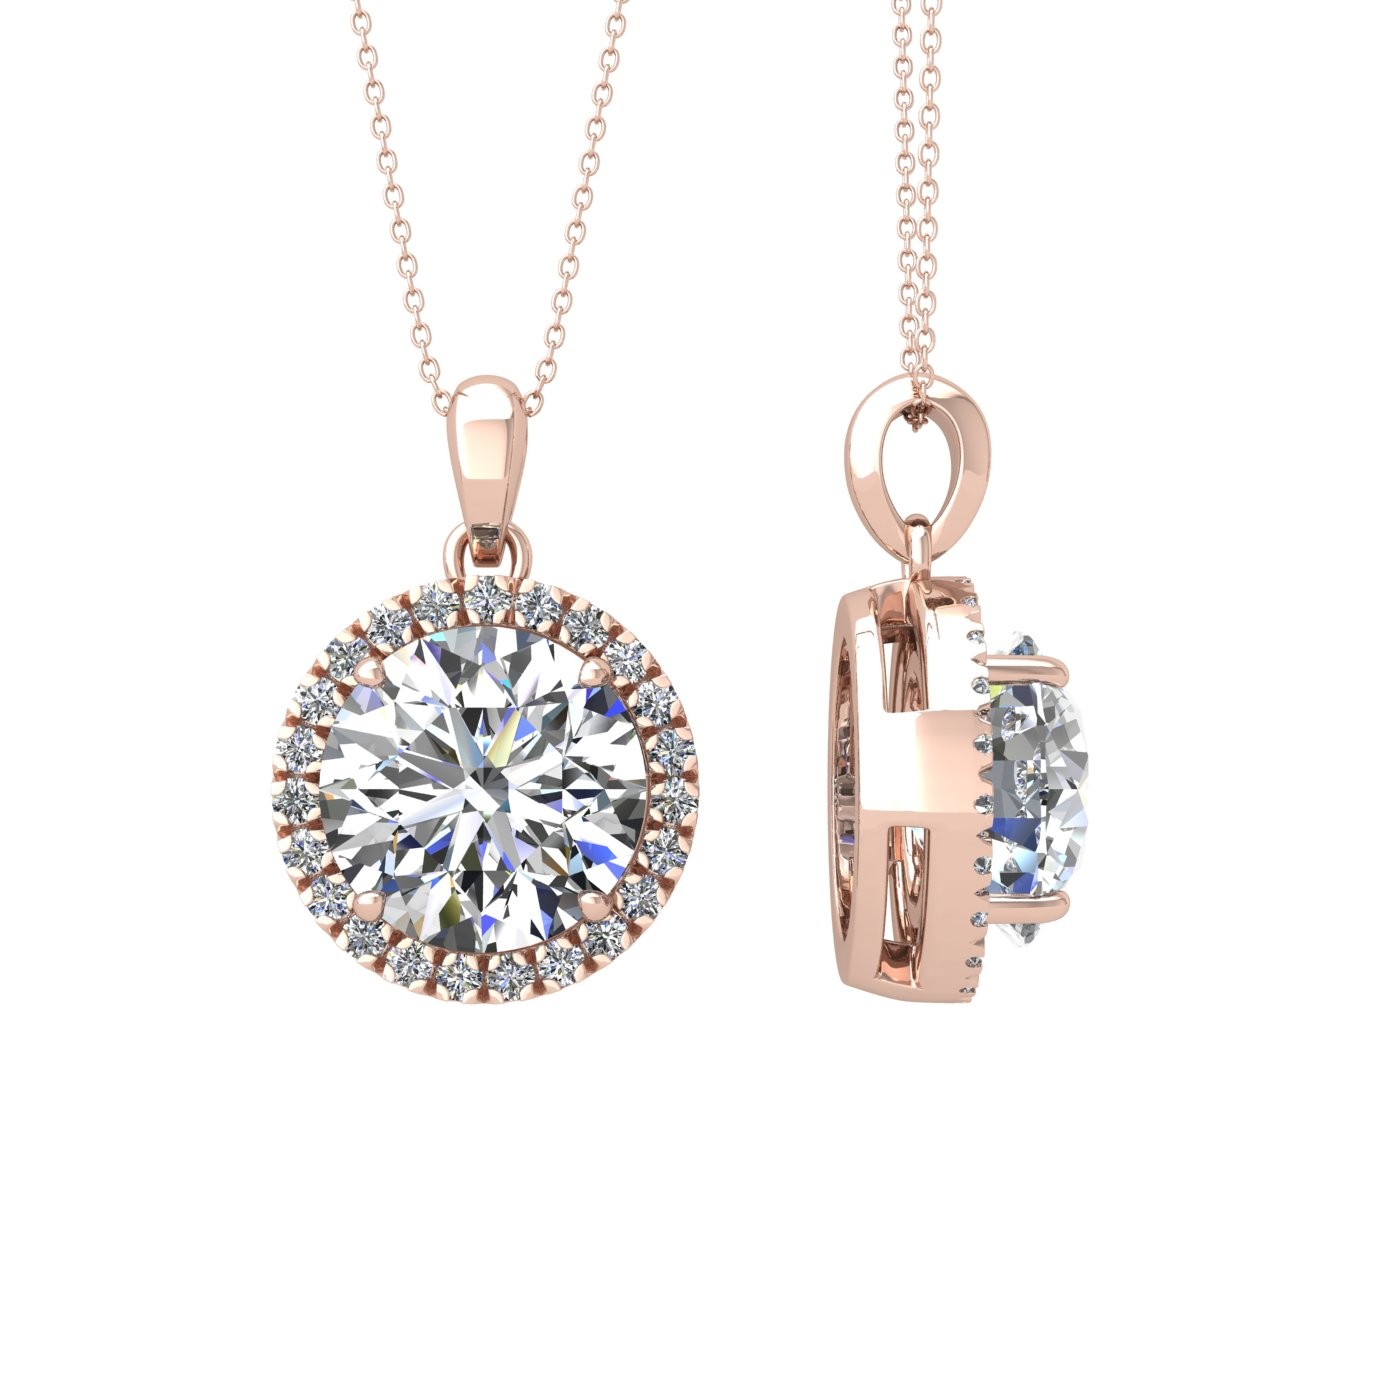 18k rose gold  1,5 ct 4 prong round shape diamond pendant with diamond pavÉ set halo including chain seperate from the pendant Photos & images